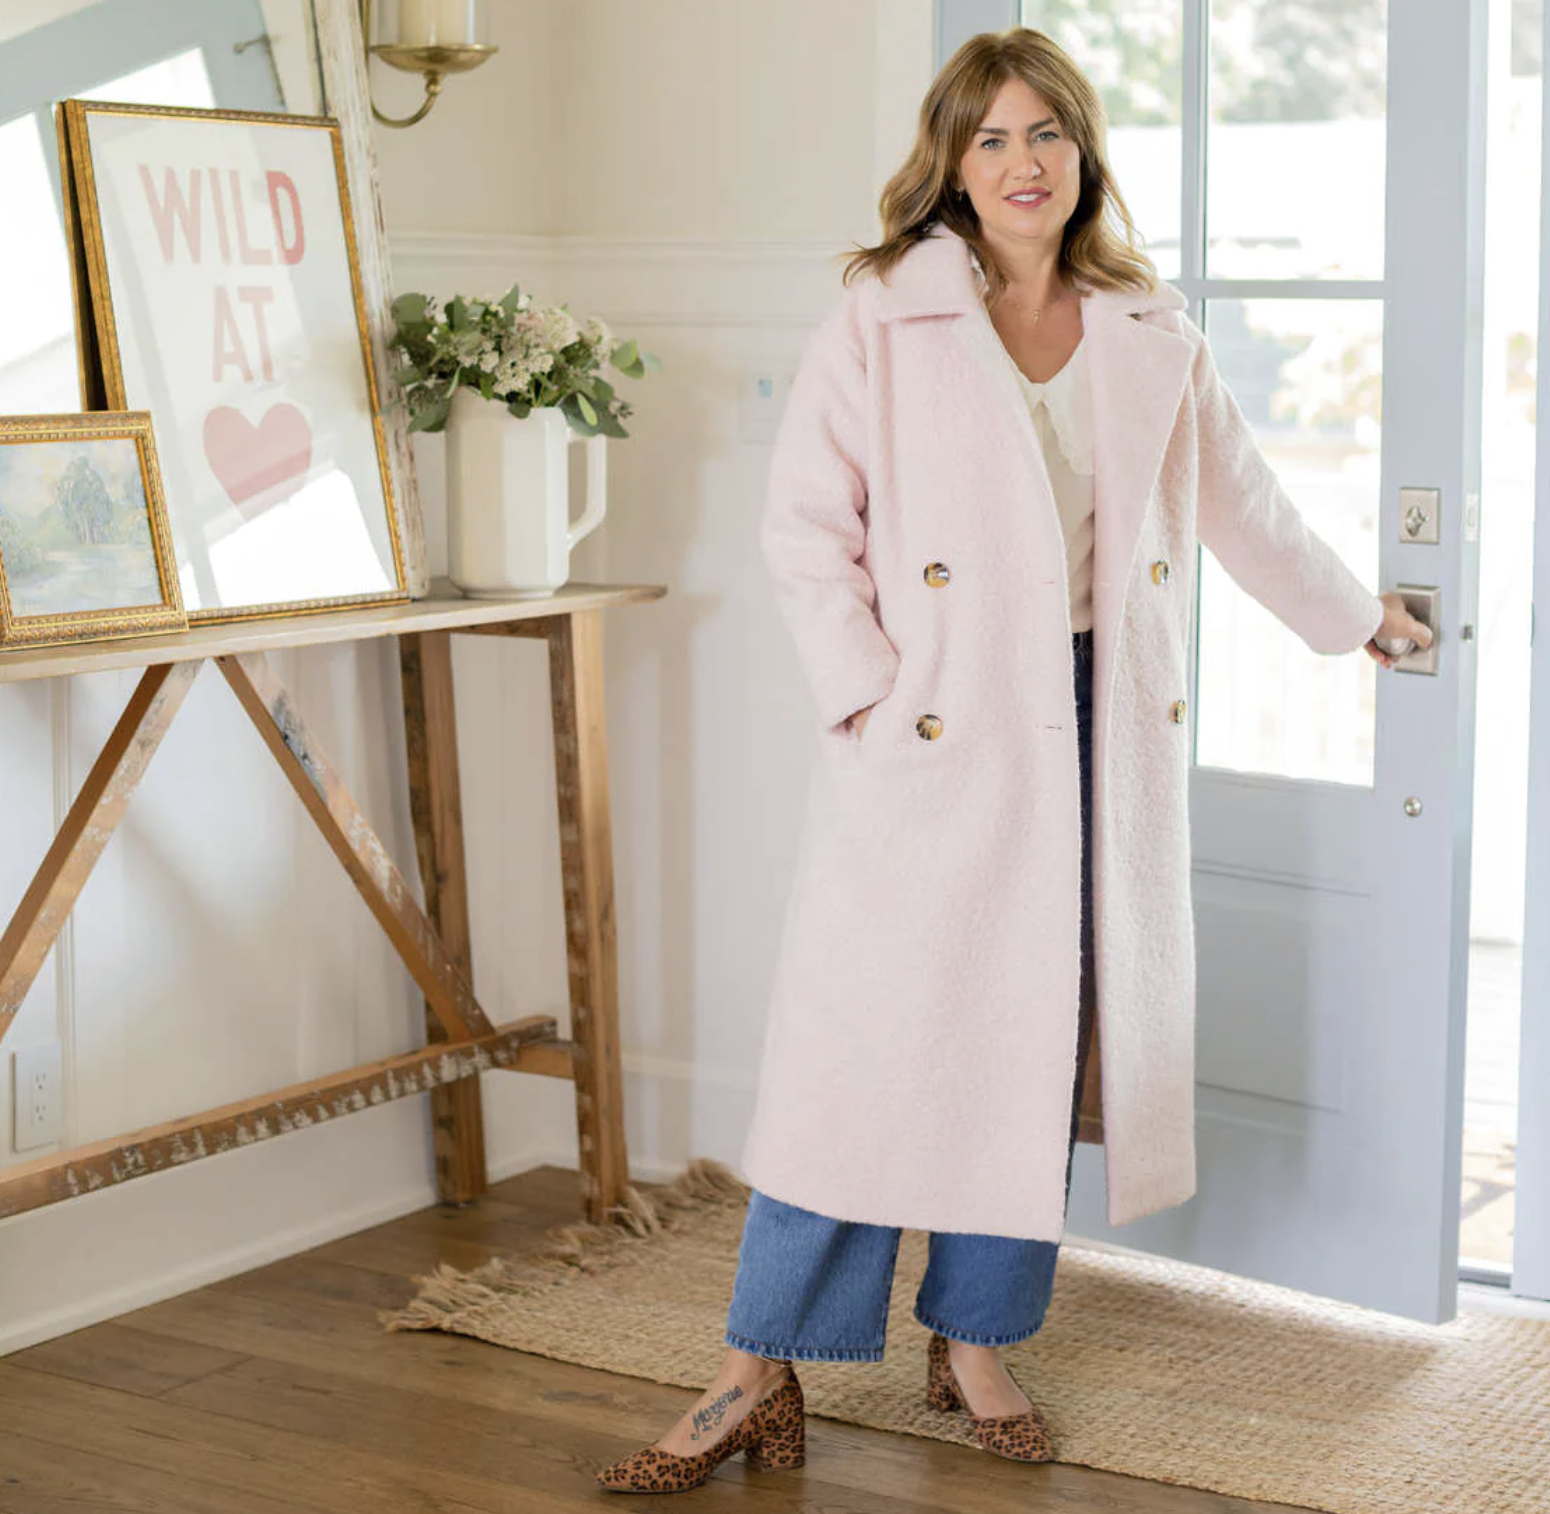 Jillian Harris wearing the coat while standing in an entryway and opening a front door